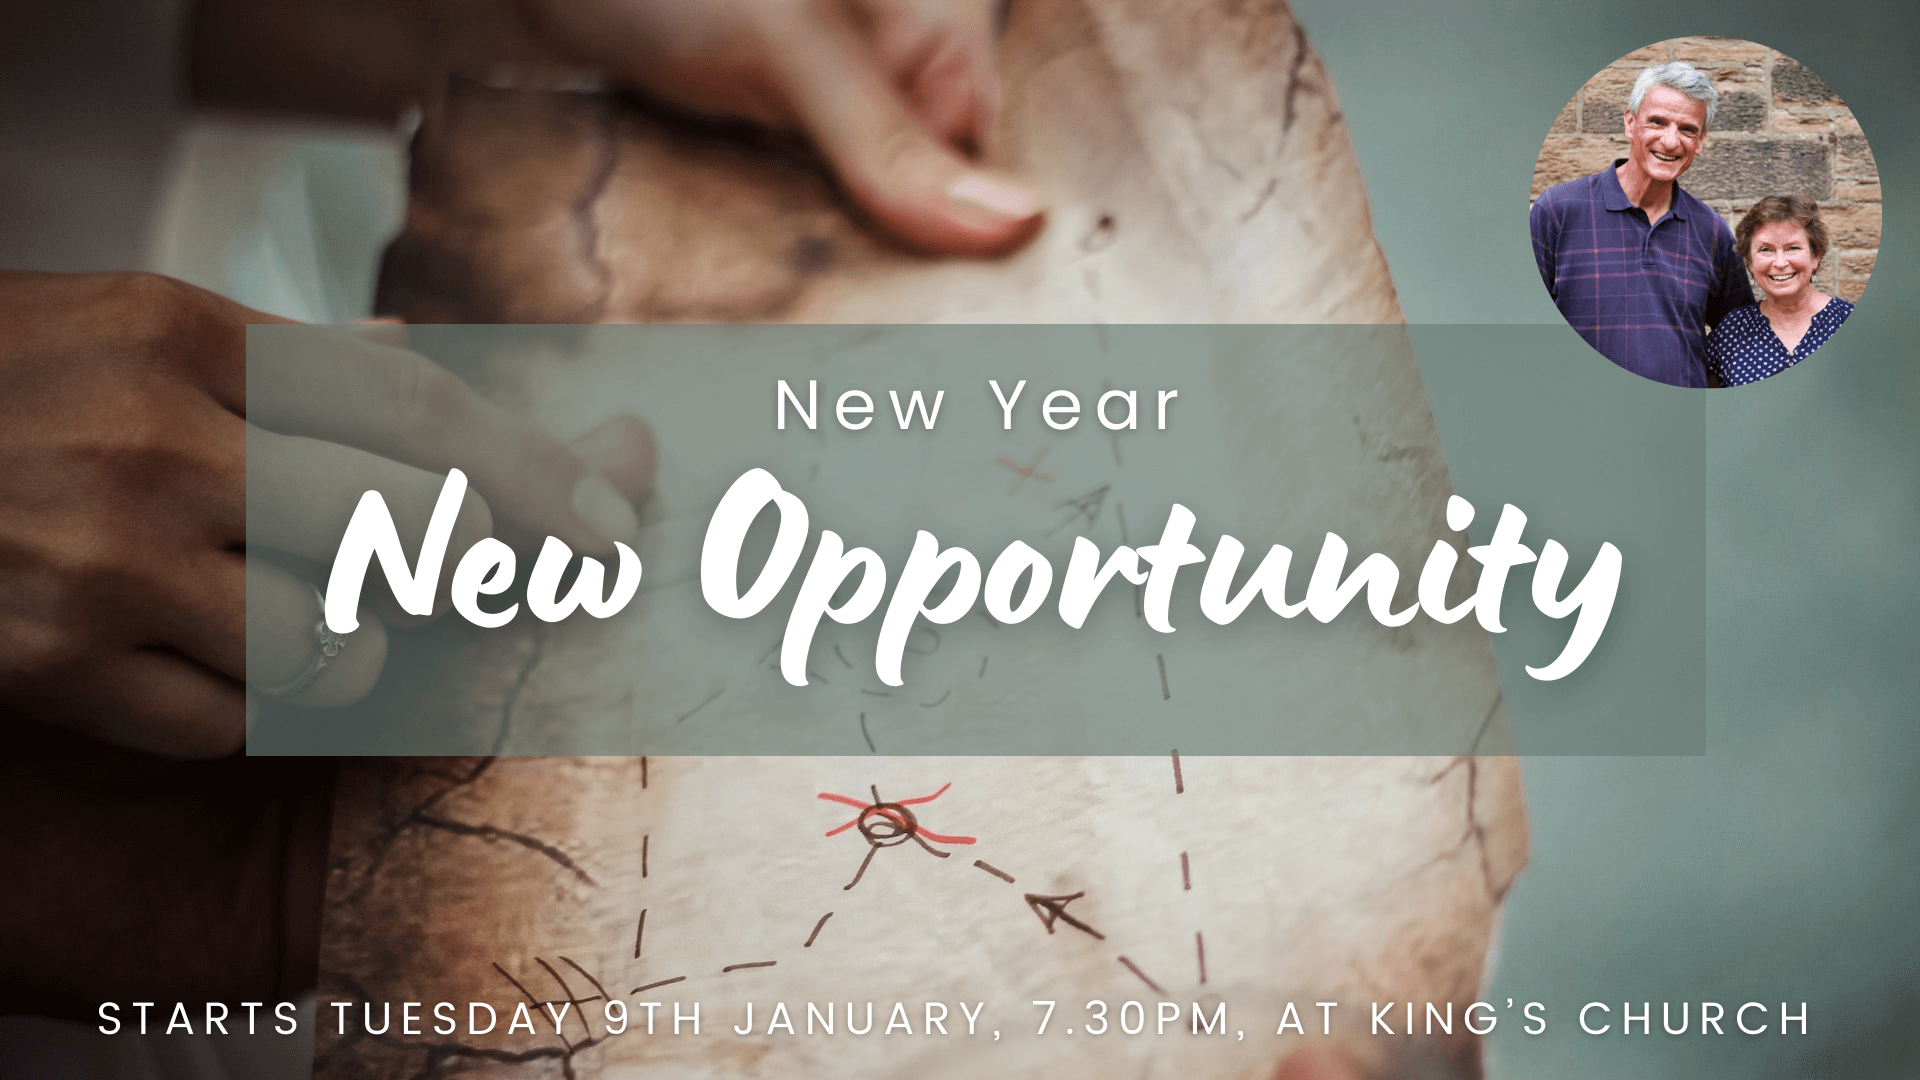 New Year, New Opportunity